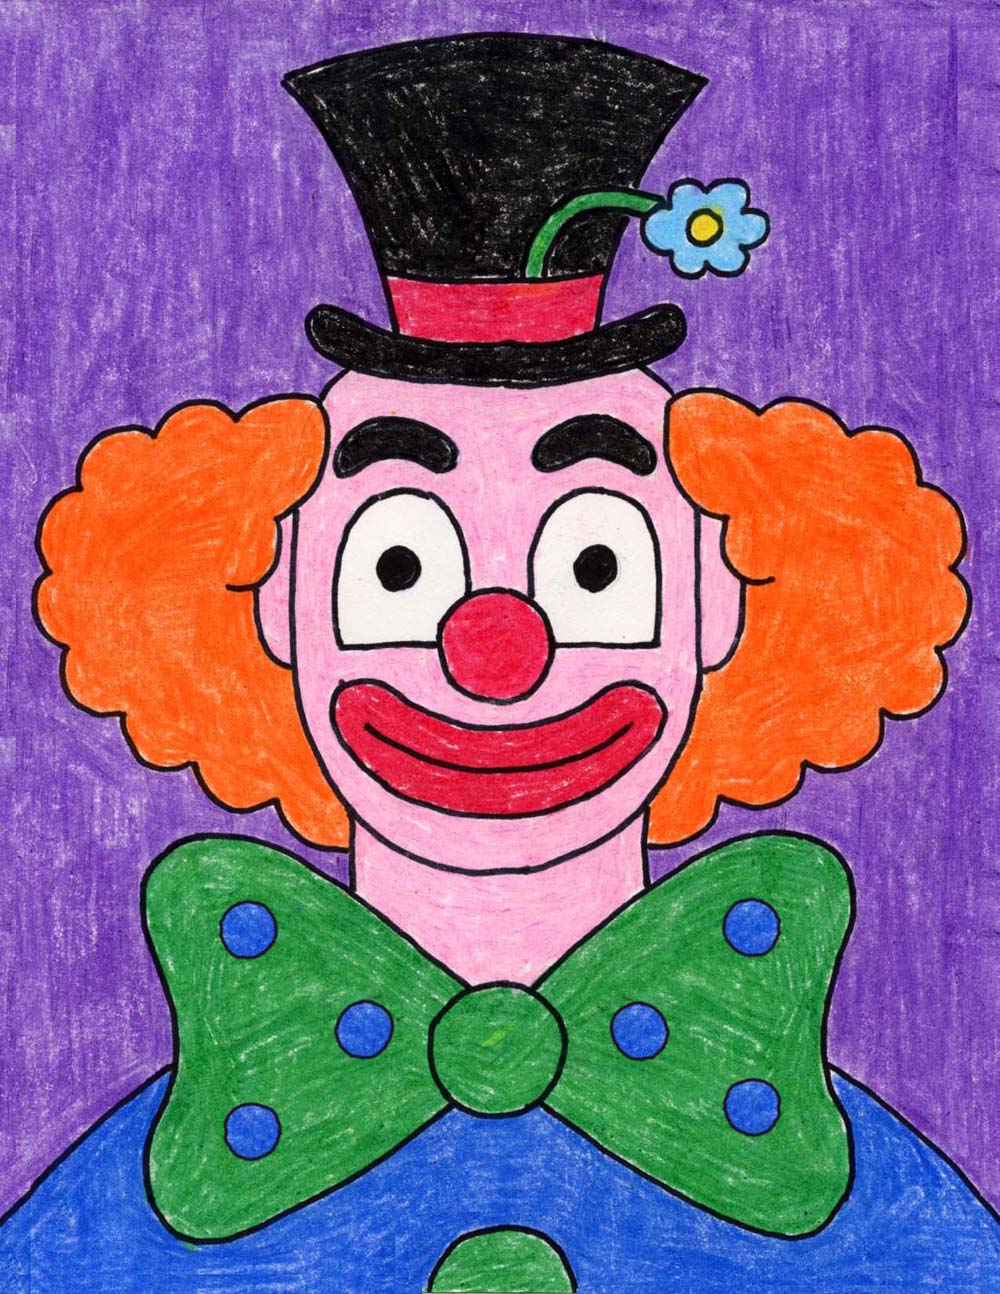 How to Draw a Clown Face · Art Projects for Kids